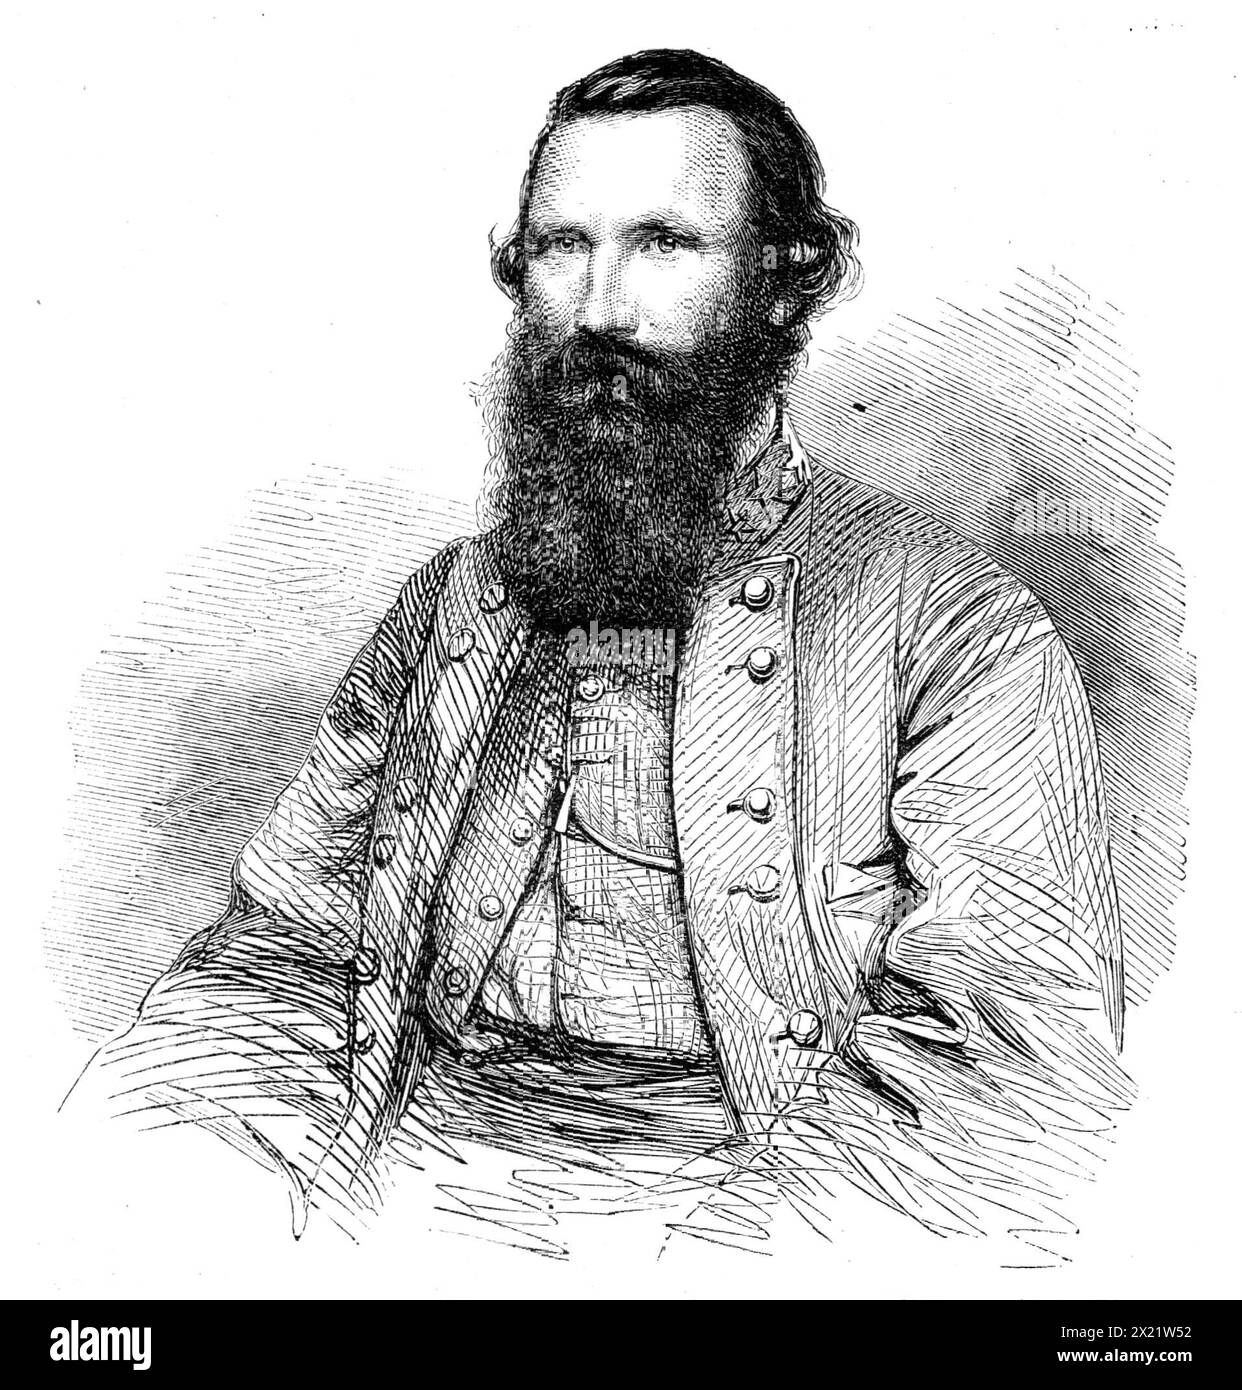 The late General J. E. B. Stuart, of the Army of the Confederate States, 1864. Stuart '...received his mortal wound in a cavalry skirmish with the detachment under General Sheridan at Ashland...The doctor, knowing he did not desire to be buoyed by false hopes, told him frankly that death was rapidly approaching. The General nodded and said, 'I am resigned, if it be God's will; but I would like to live to see my wife. But God's will be done.' Several times he roused up and asked if she had come. To the doctor, who sat holding his wrist and counting the weakening pulse, he remarked, 'Doctor, I s Stock Photo